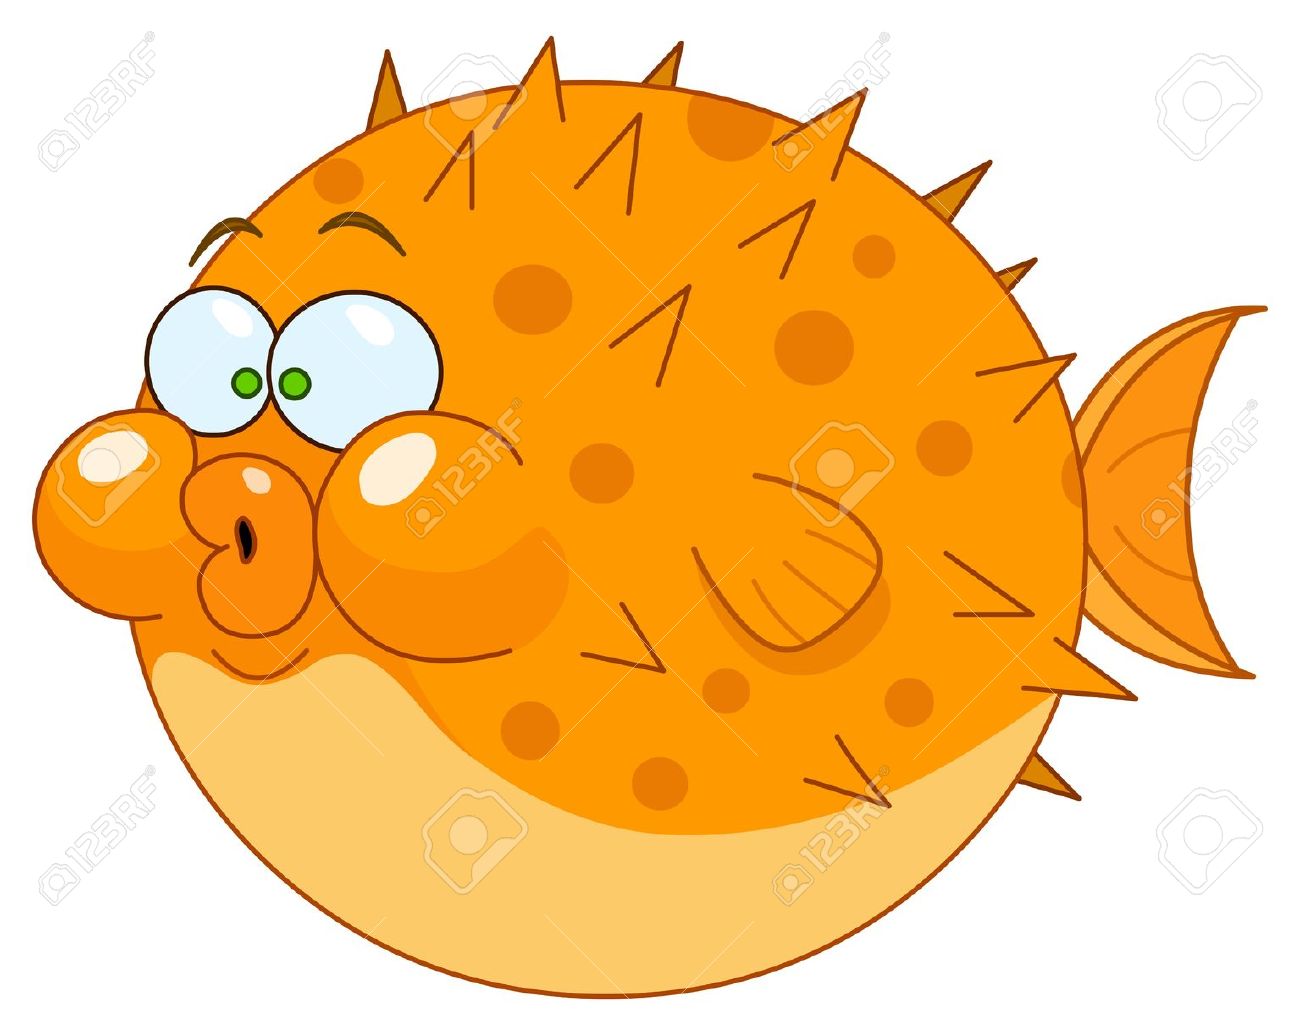 Pufferfish clipart #12, Download drawings